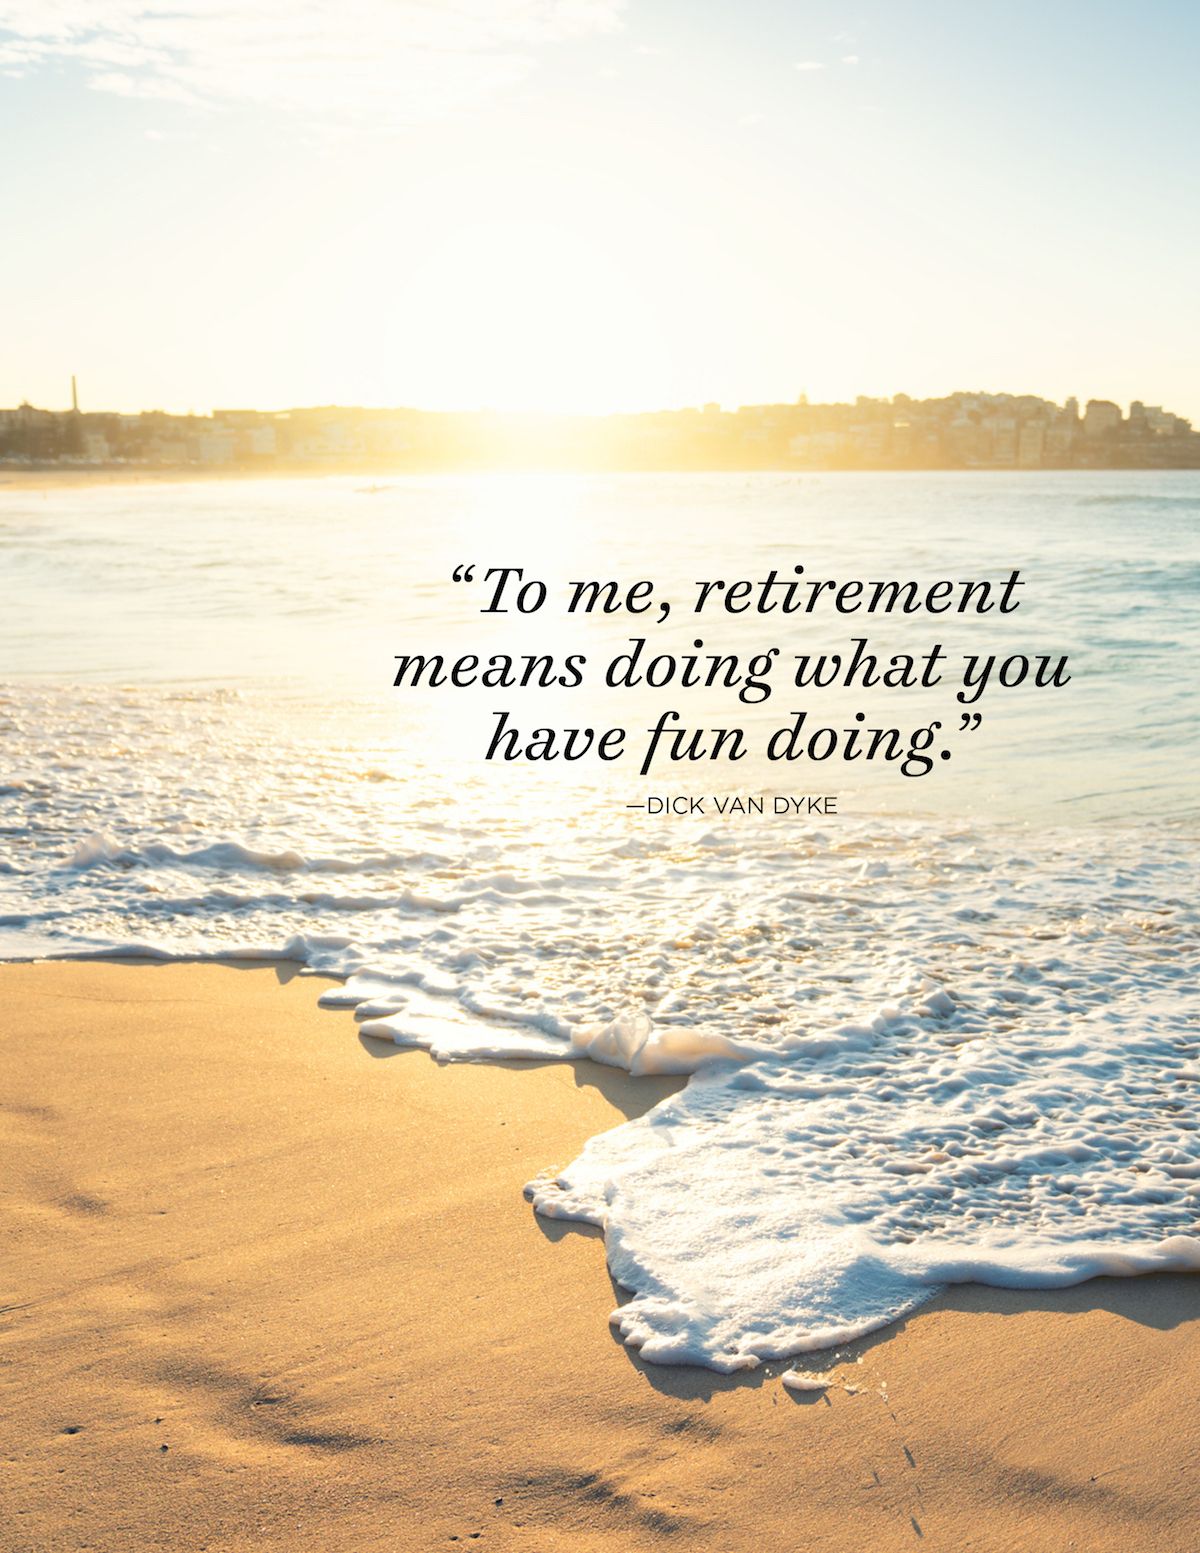 35 Great Retirement Quotes - Funny and Inspirational Quotes About ...